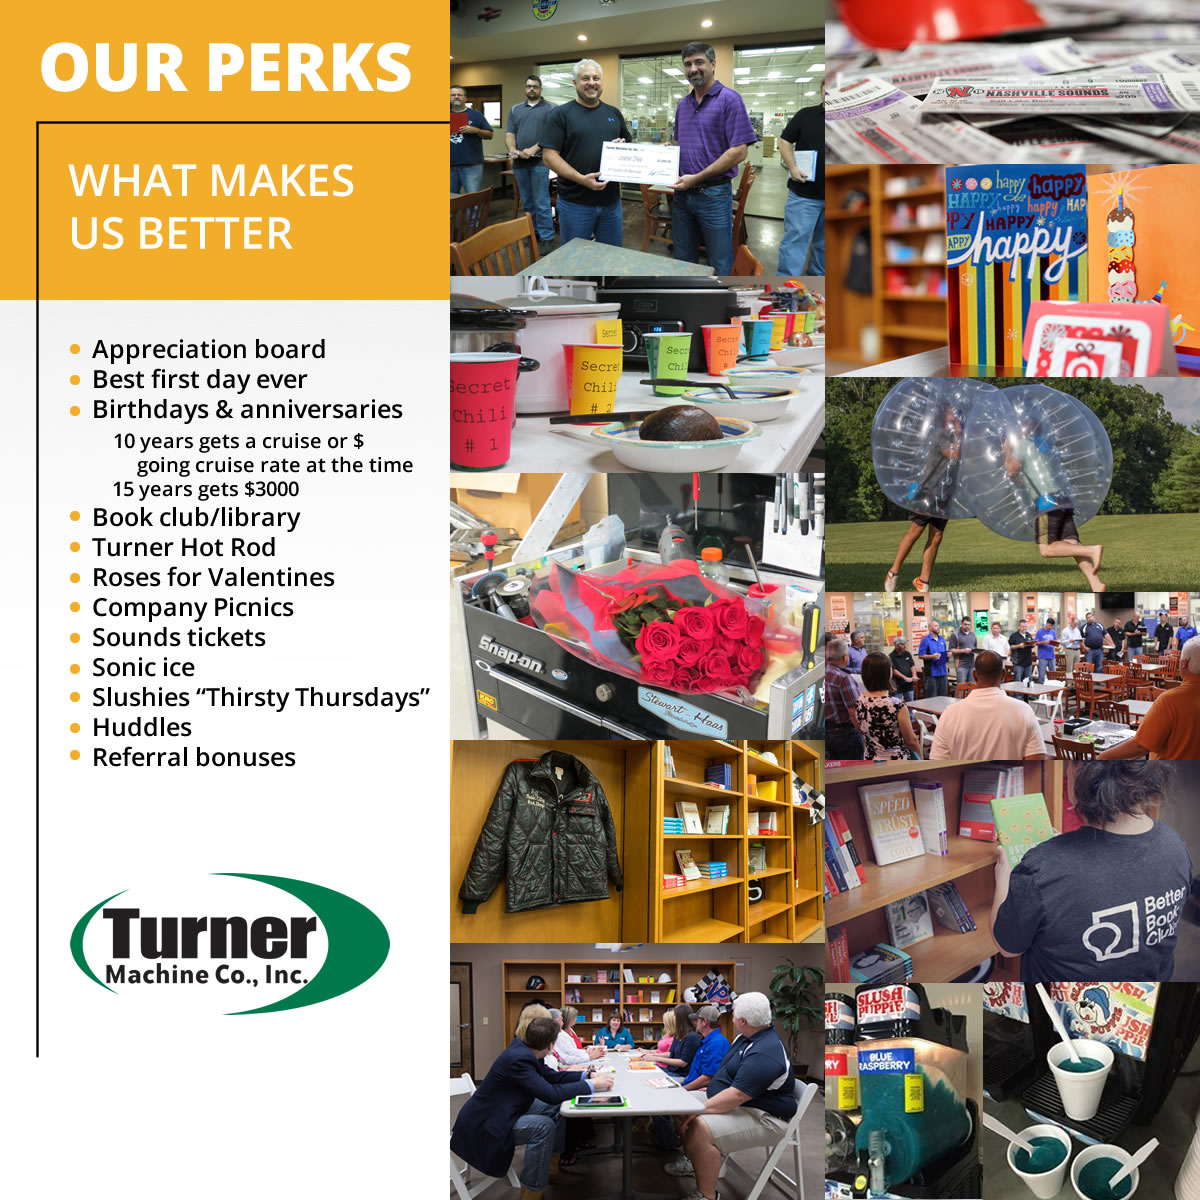 Our Perks, What Makes Turner Machine Better